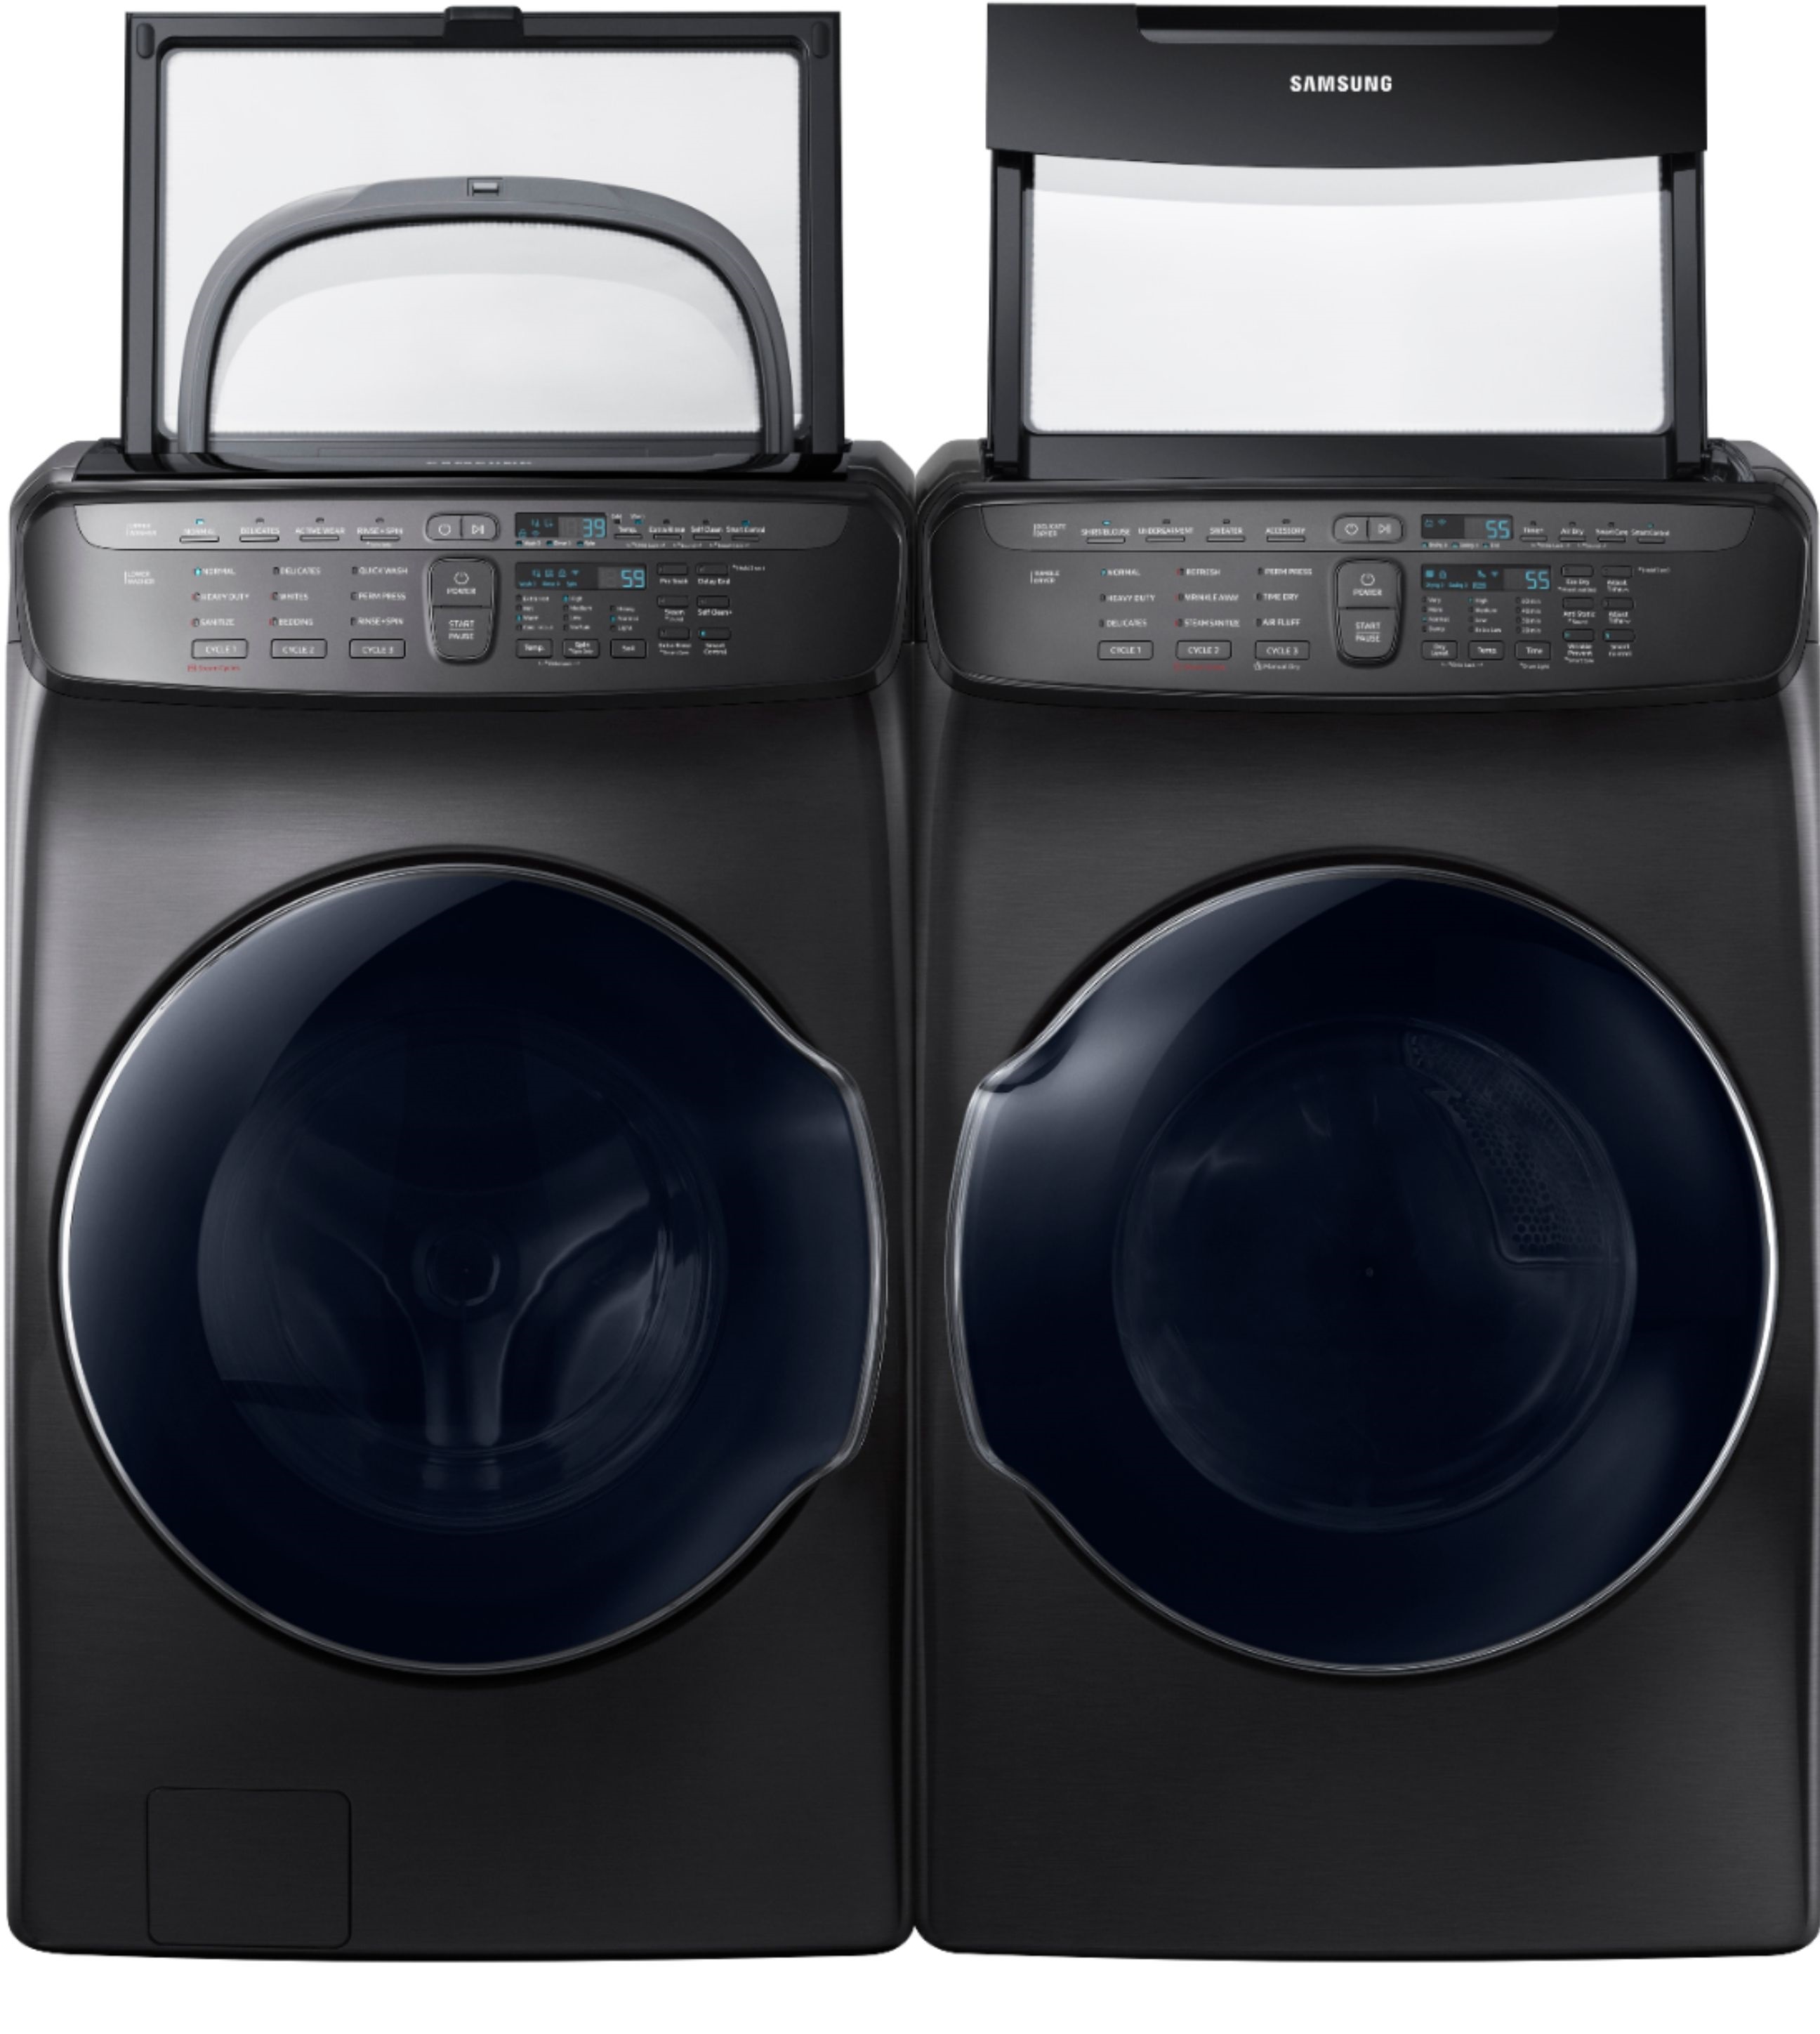 Samsung - 5.5 Cu. Ft. High Efficiency Front Load Washer & Samsung - 7.5 Cu. Ft. Smart Electric Dryer - Black stainless steel